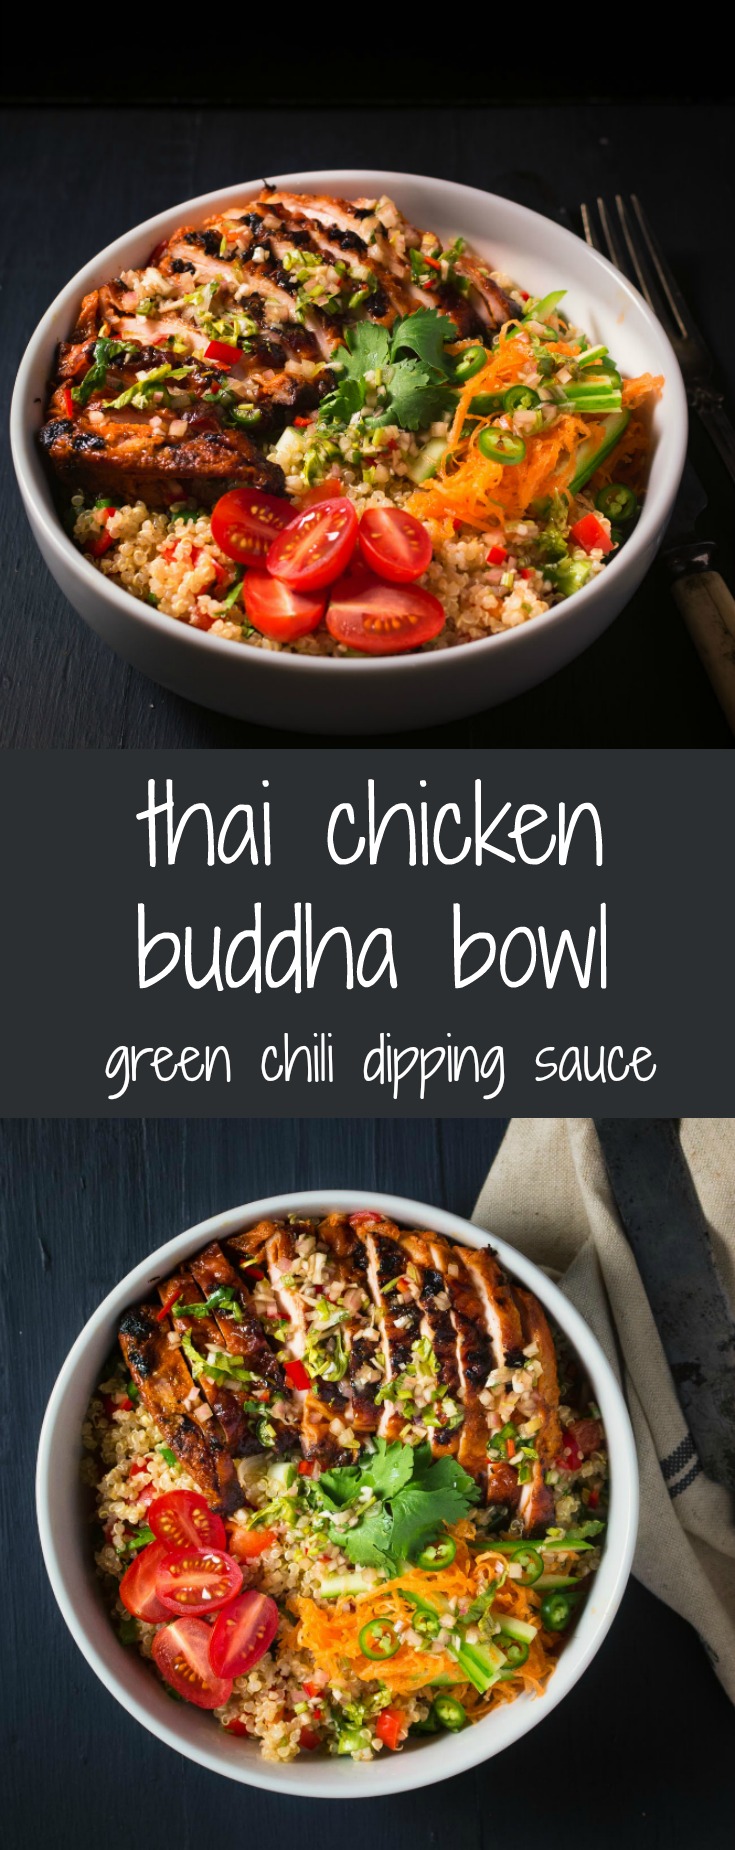 Thai chicken buddha bowl delivers big sweet, sour, salty and spicy flavours.